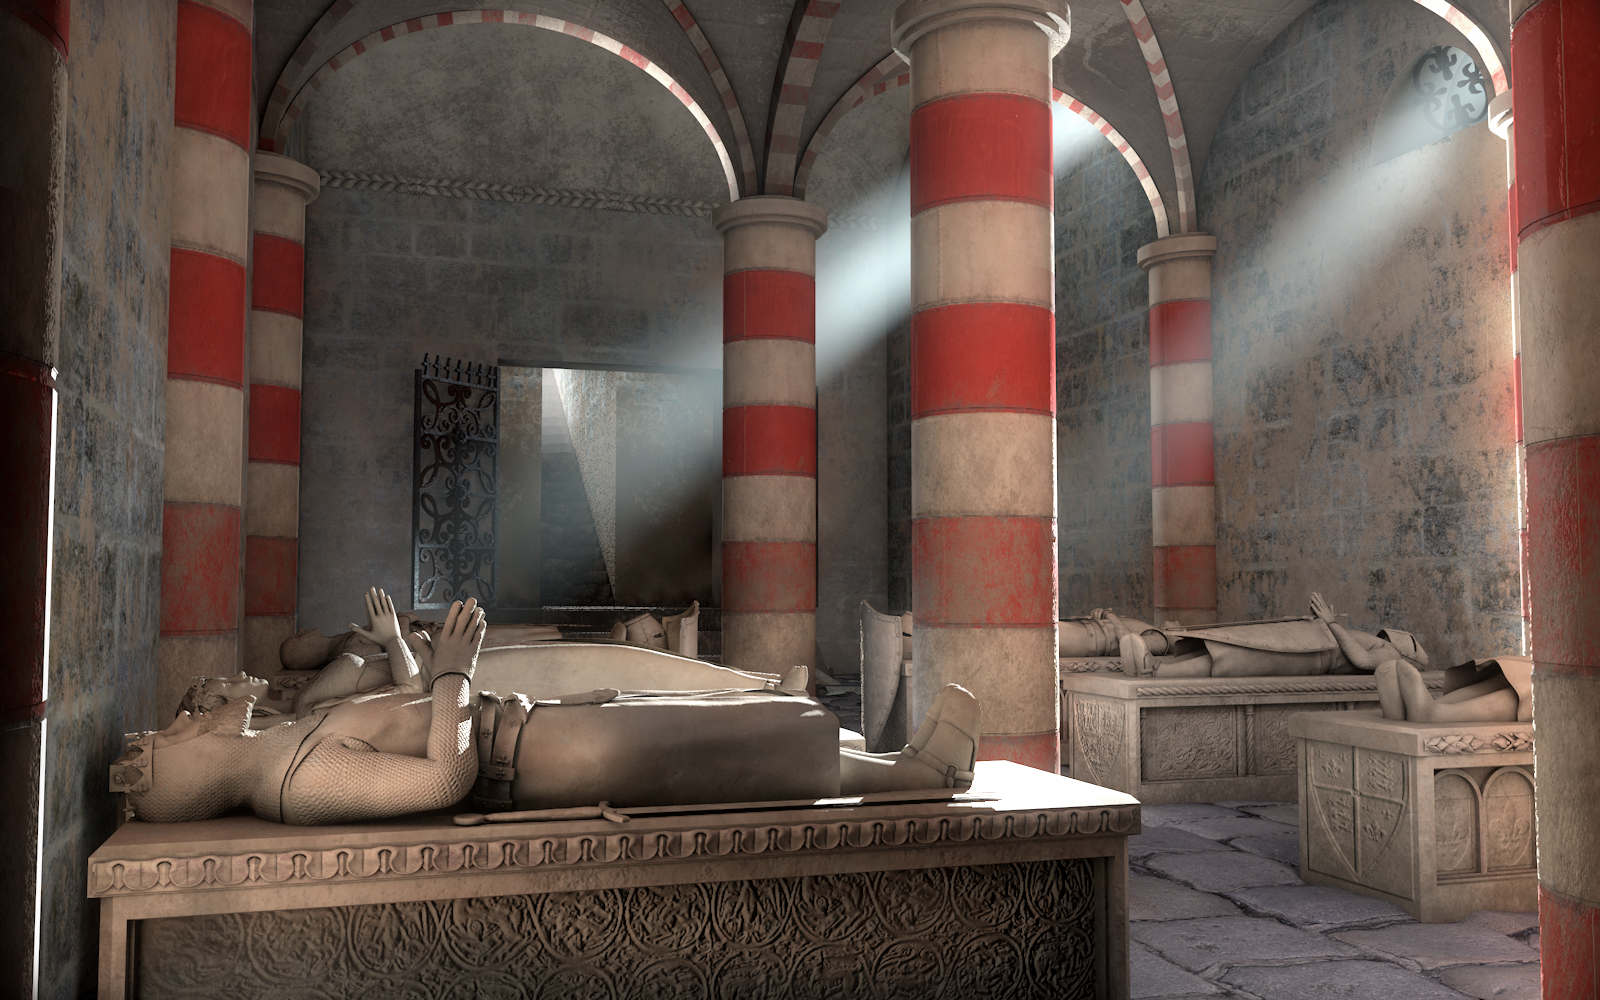 Crypt of the Recumbents by: Ansiko, 3D Models by Daz 3D